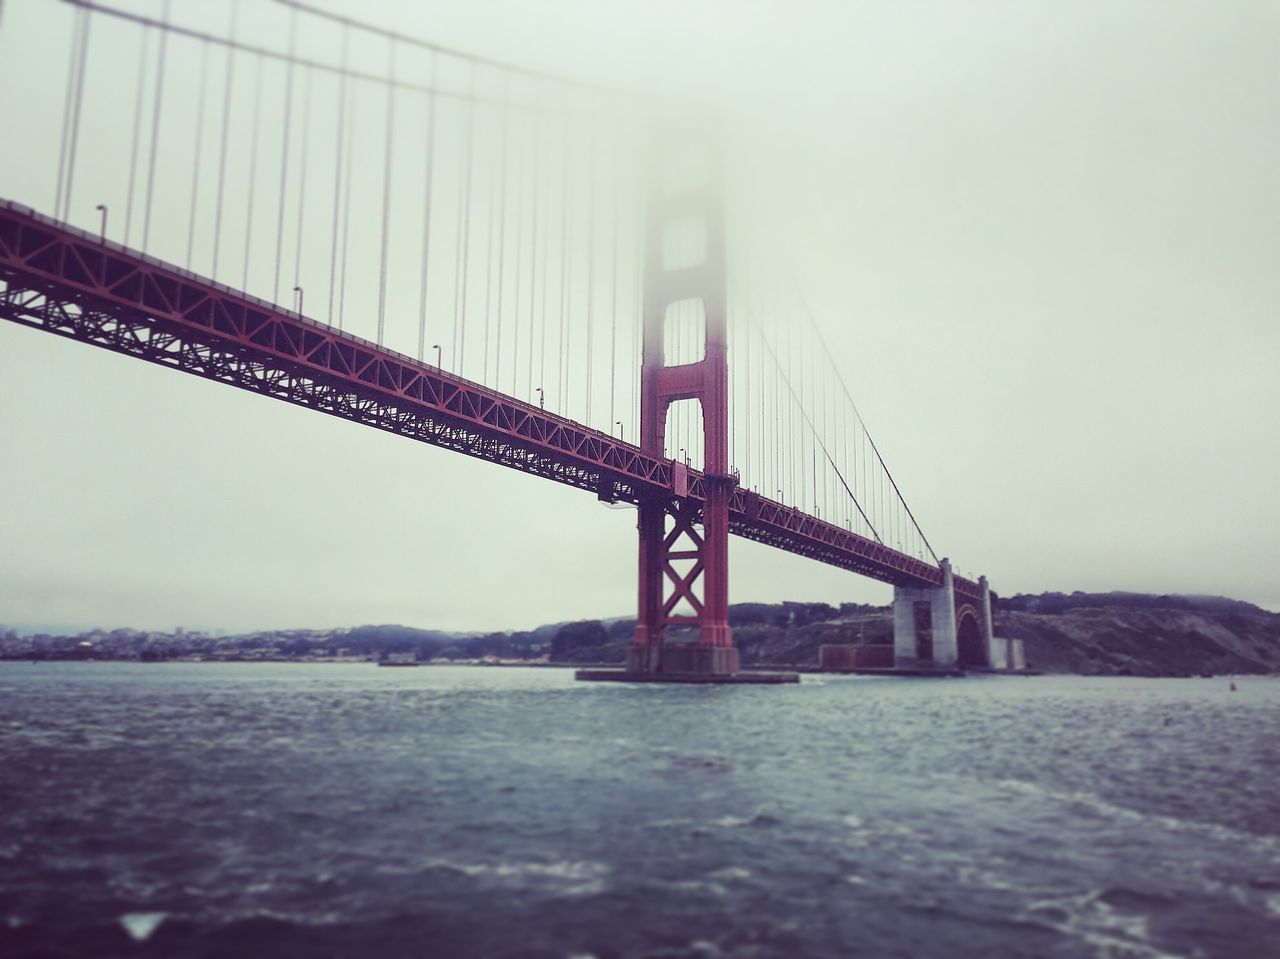 built structure, architecture, connection, bridge - man made structure, engineering, suspension bridge, water, waterfront, river, fog, bridge, sky, travel destinations, foggy, weather, day, outdoors, no people, tourism, nature, capital cities, development, overcast, tranquility